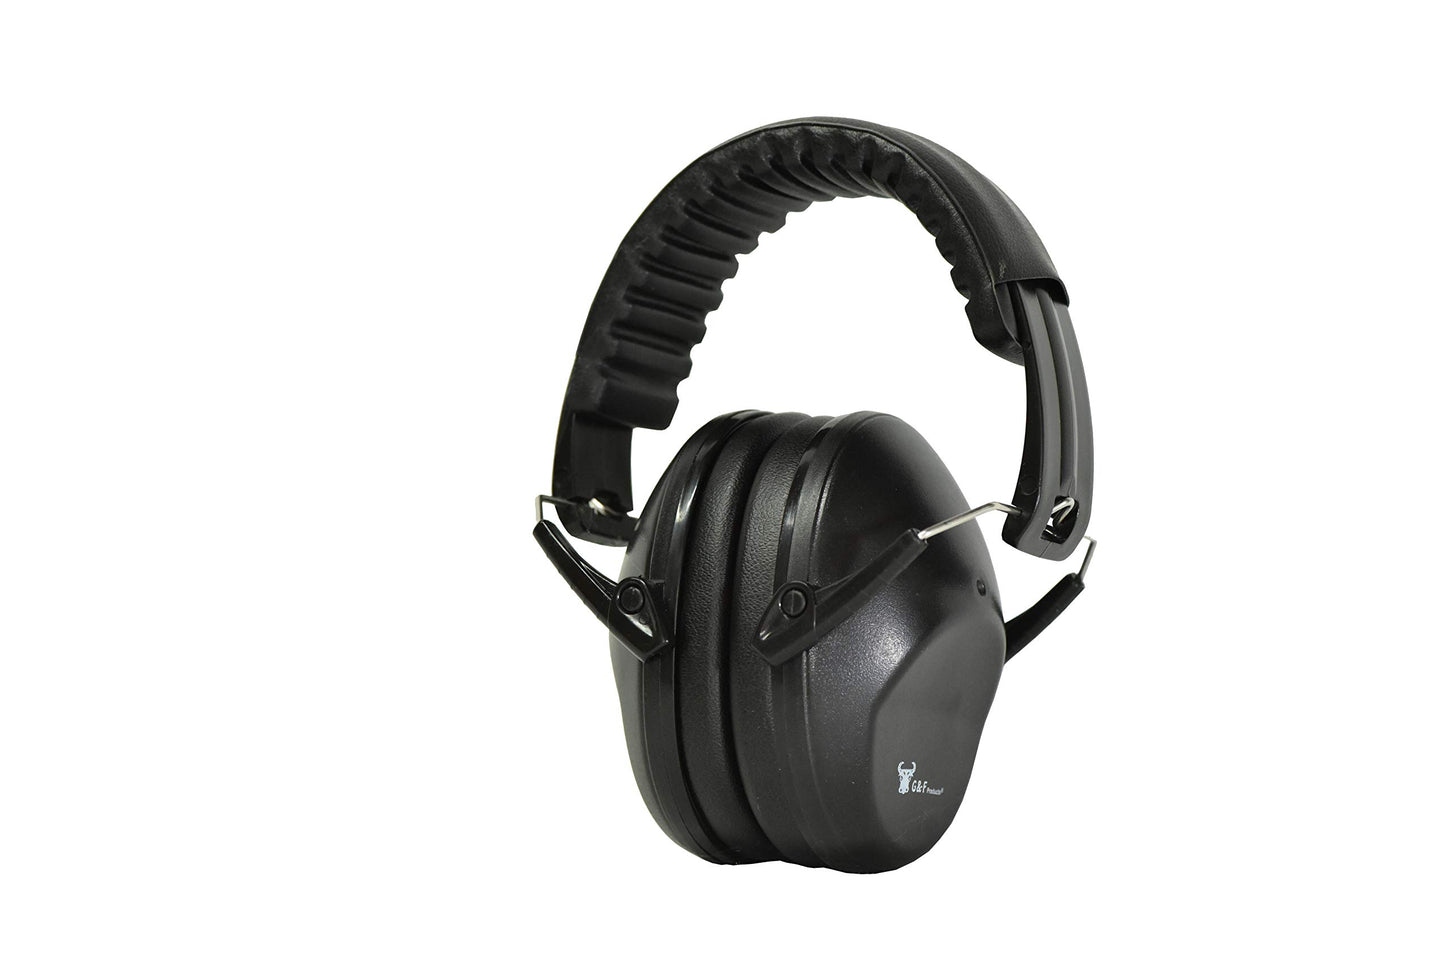 Earmuffs hearing protection with low profile passive folding design 26dB NRR and reduces up to 125dB, black